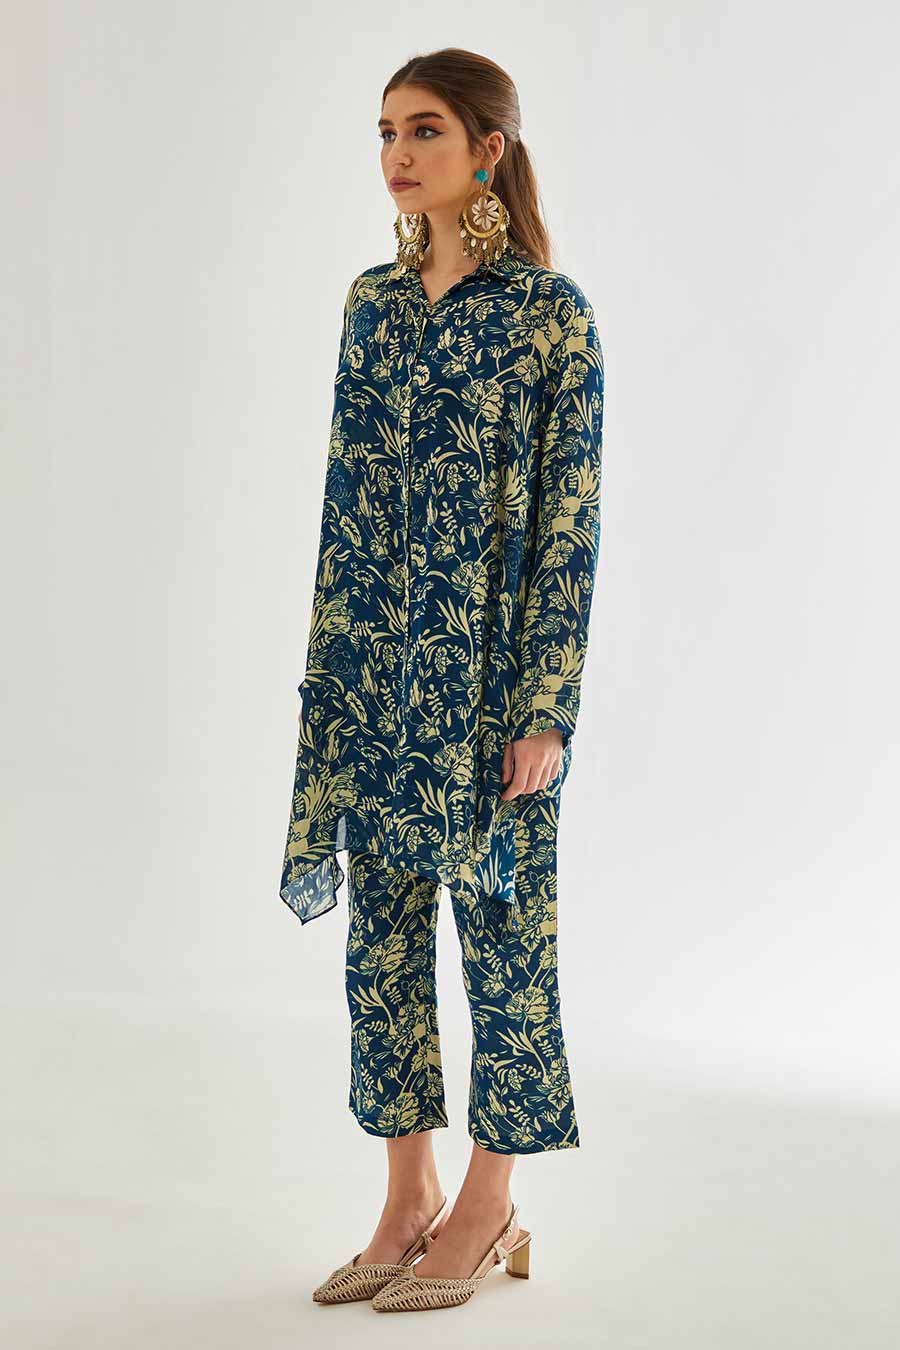 Small Blue Floral Printed Low-back Shirt & Pant Set